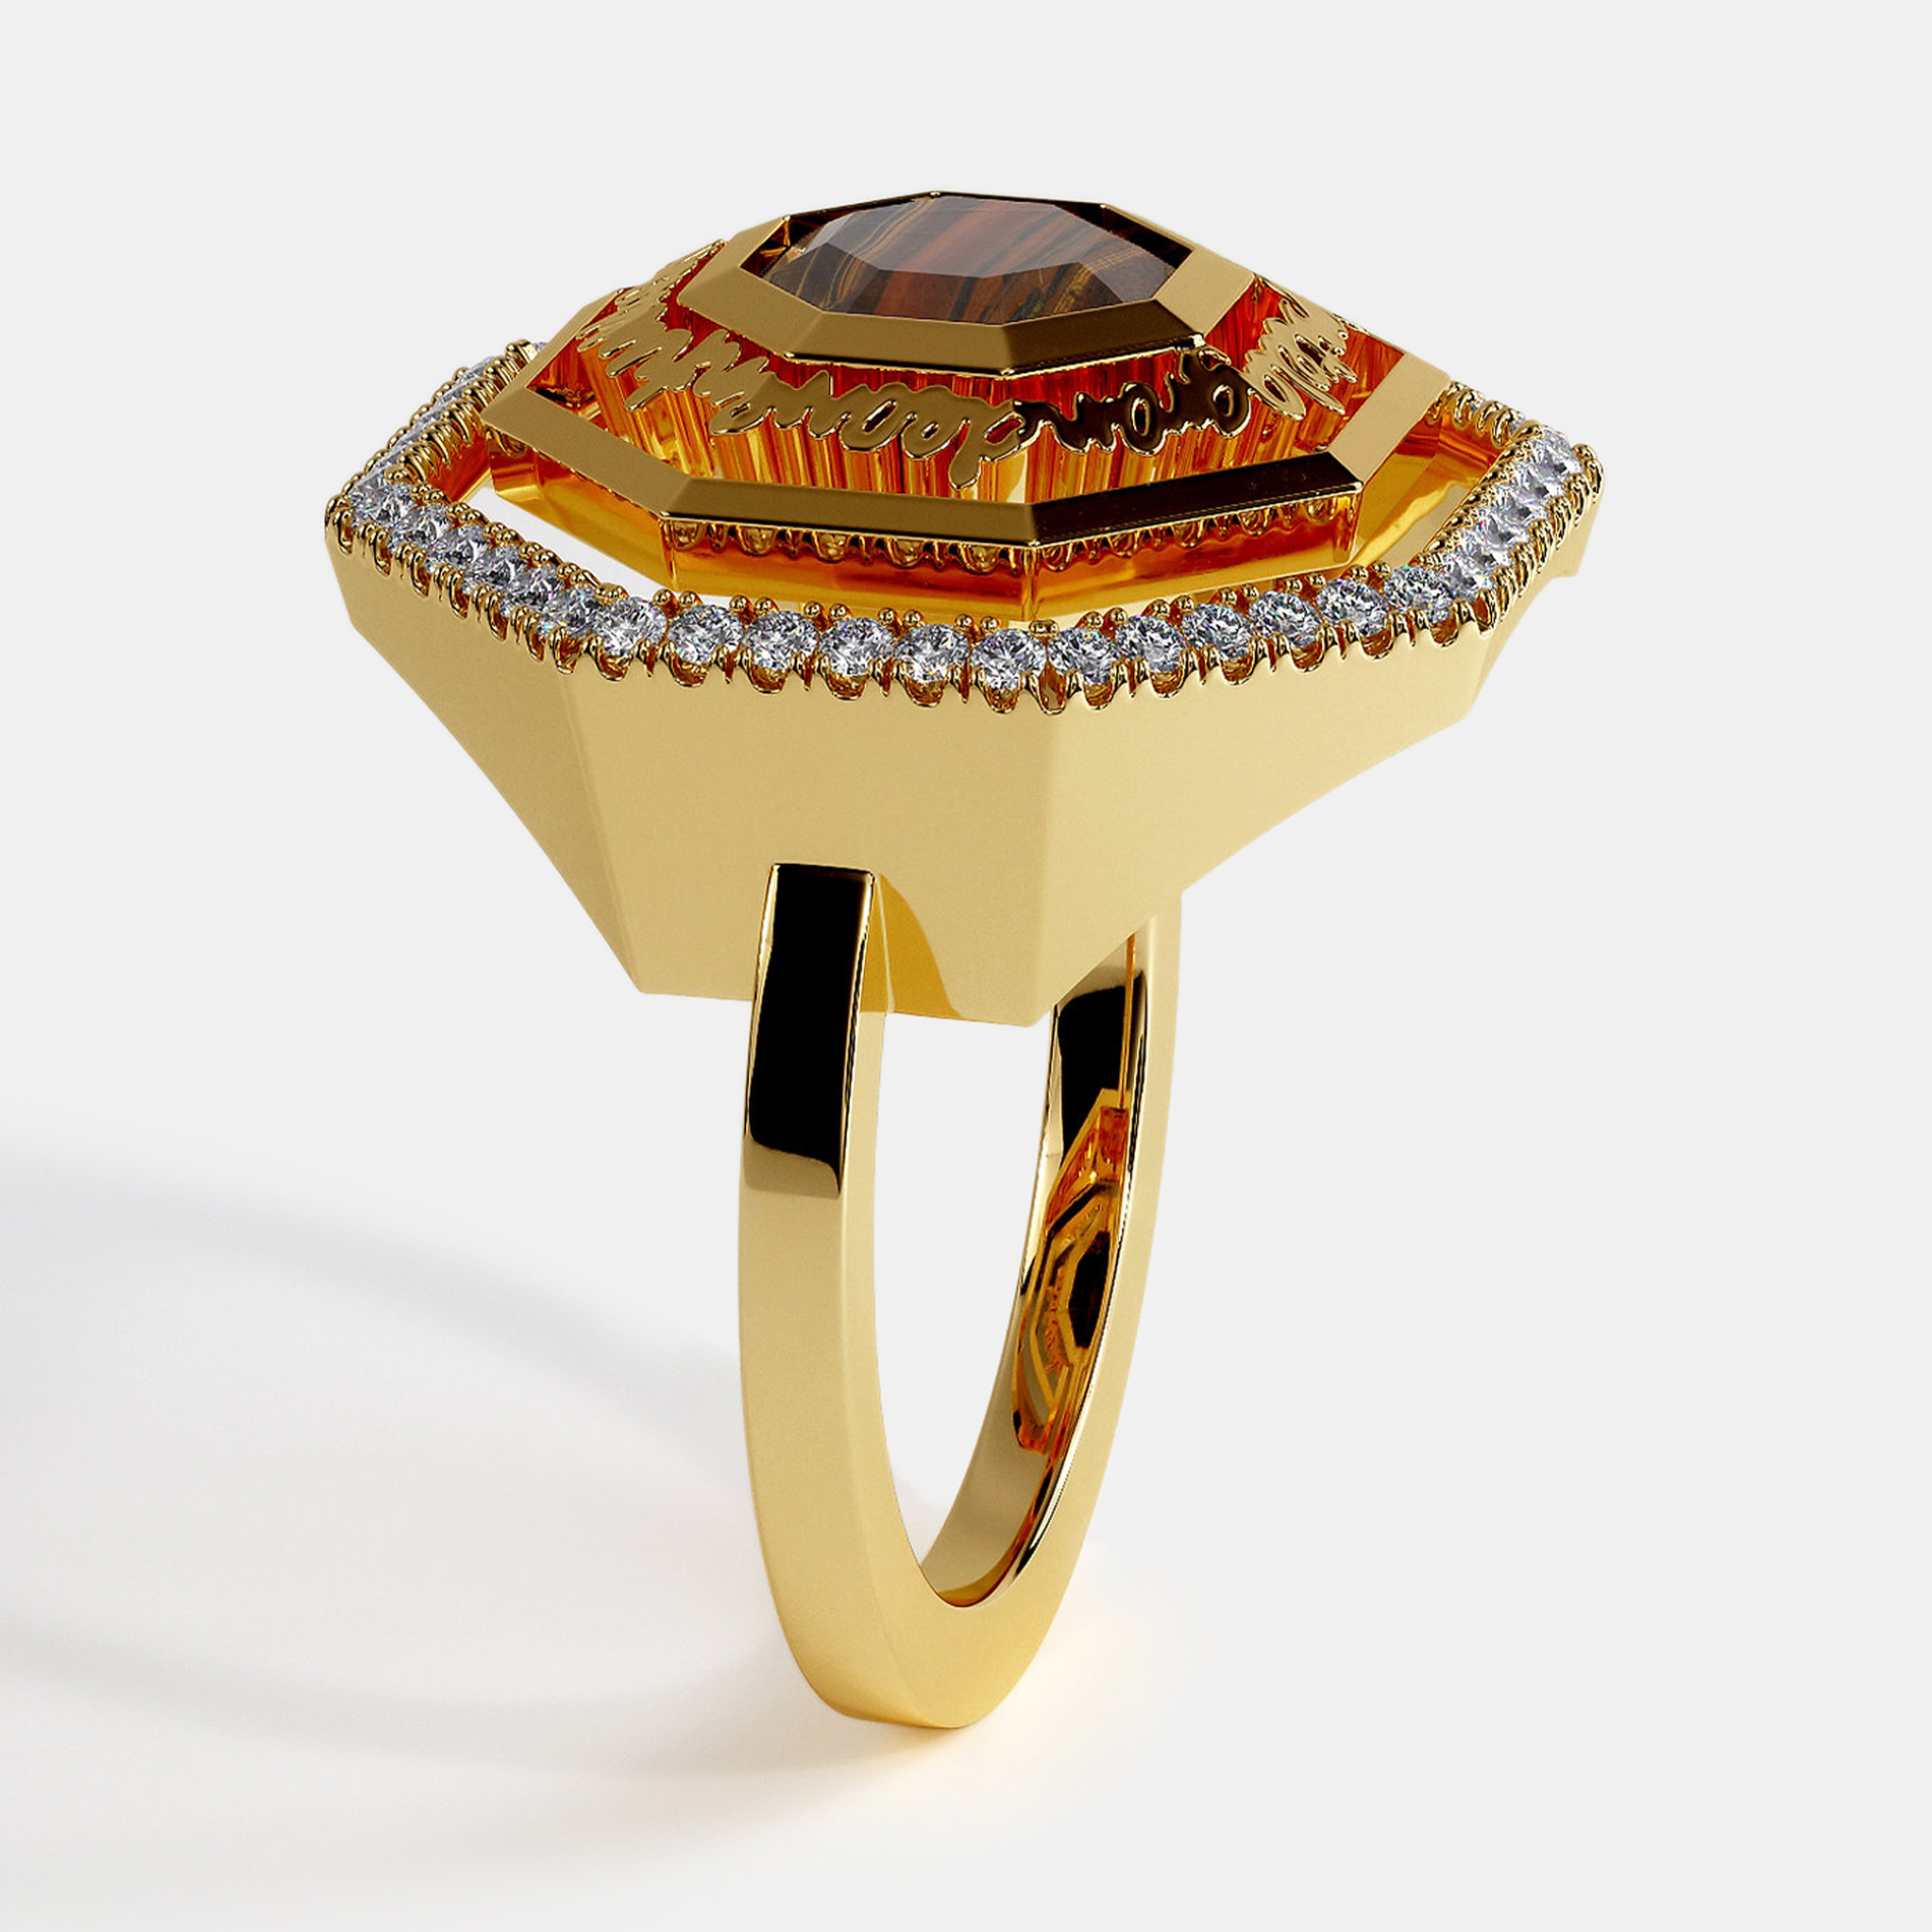 Place Vendome Ring Vendome XIII Simone Yellow Gold And Eye Tiger Size 51